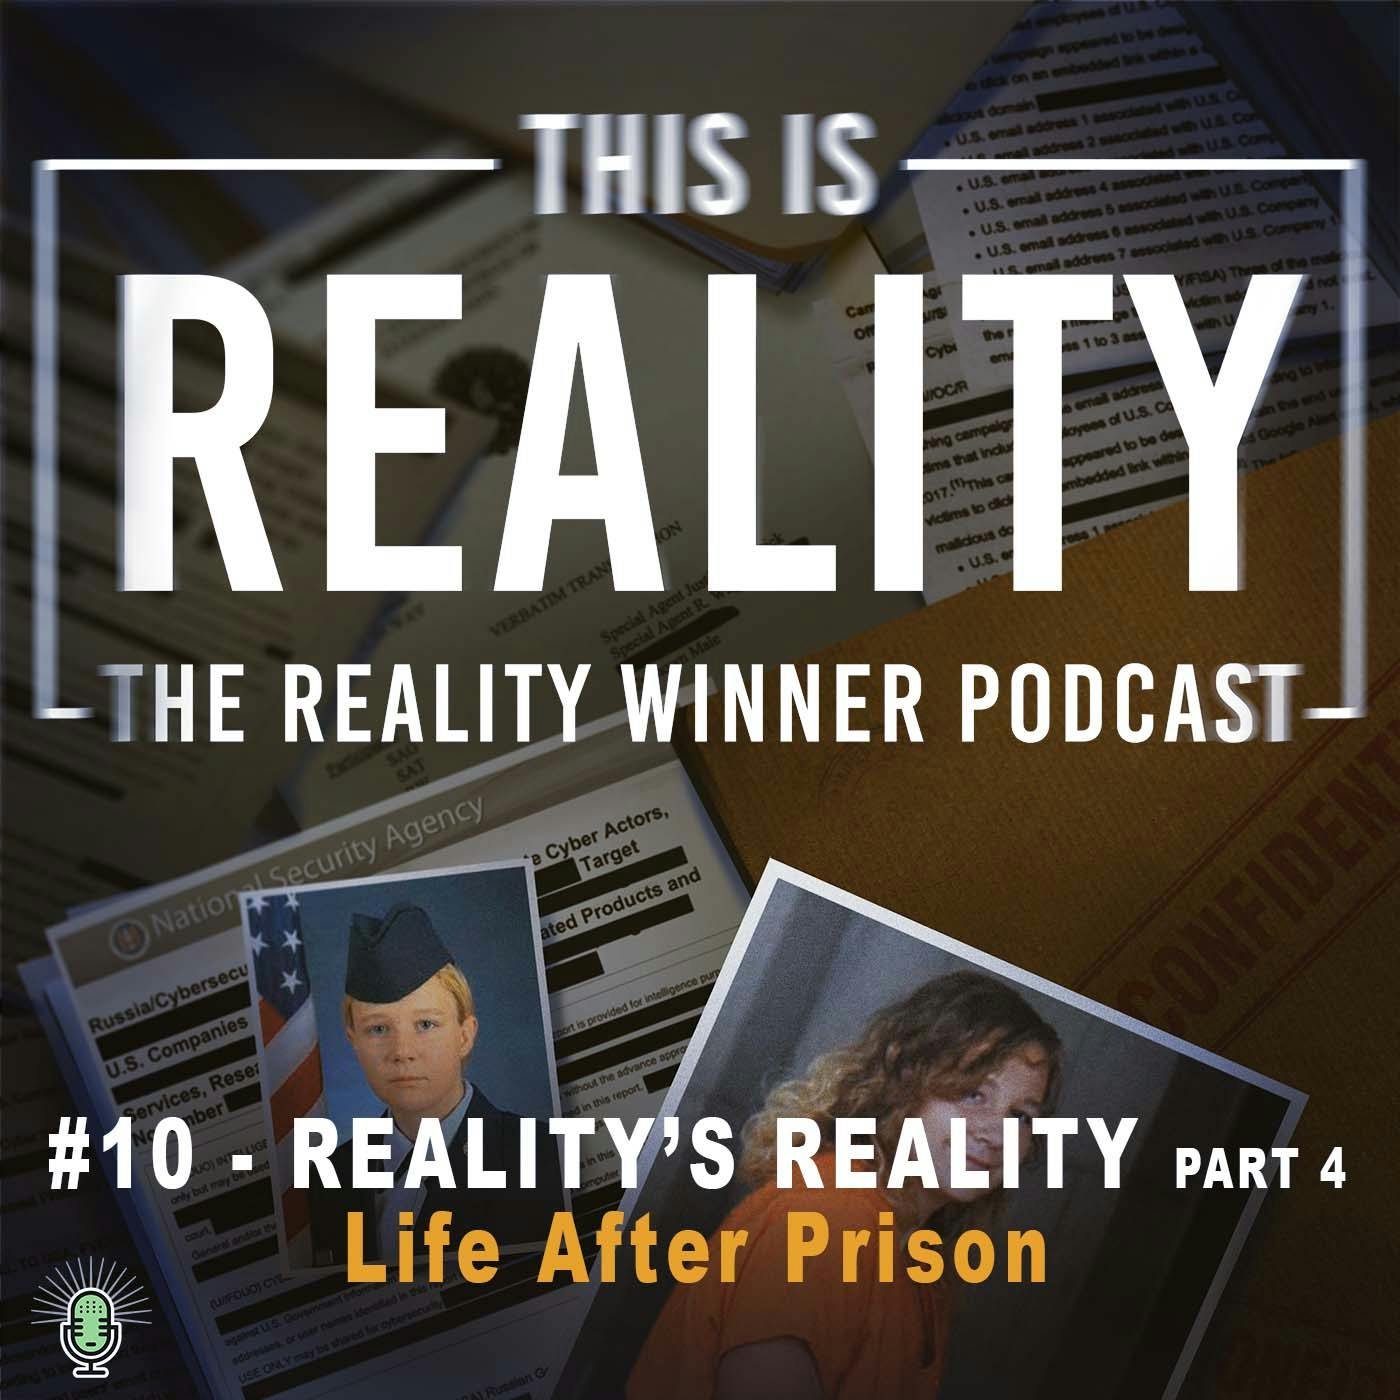 #10 - REALITY'S REALITY (Part 4): Life After Prison